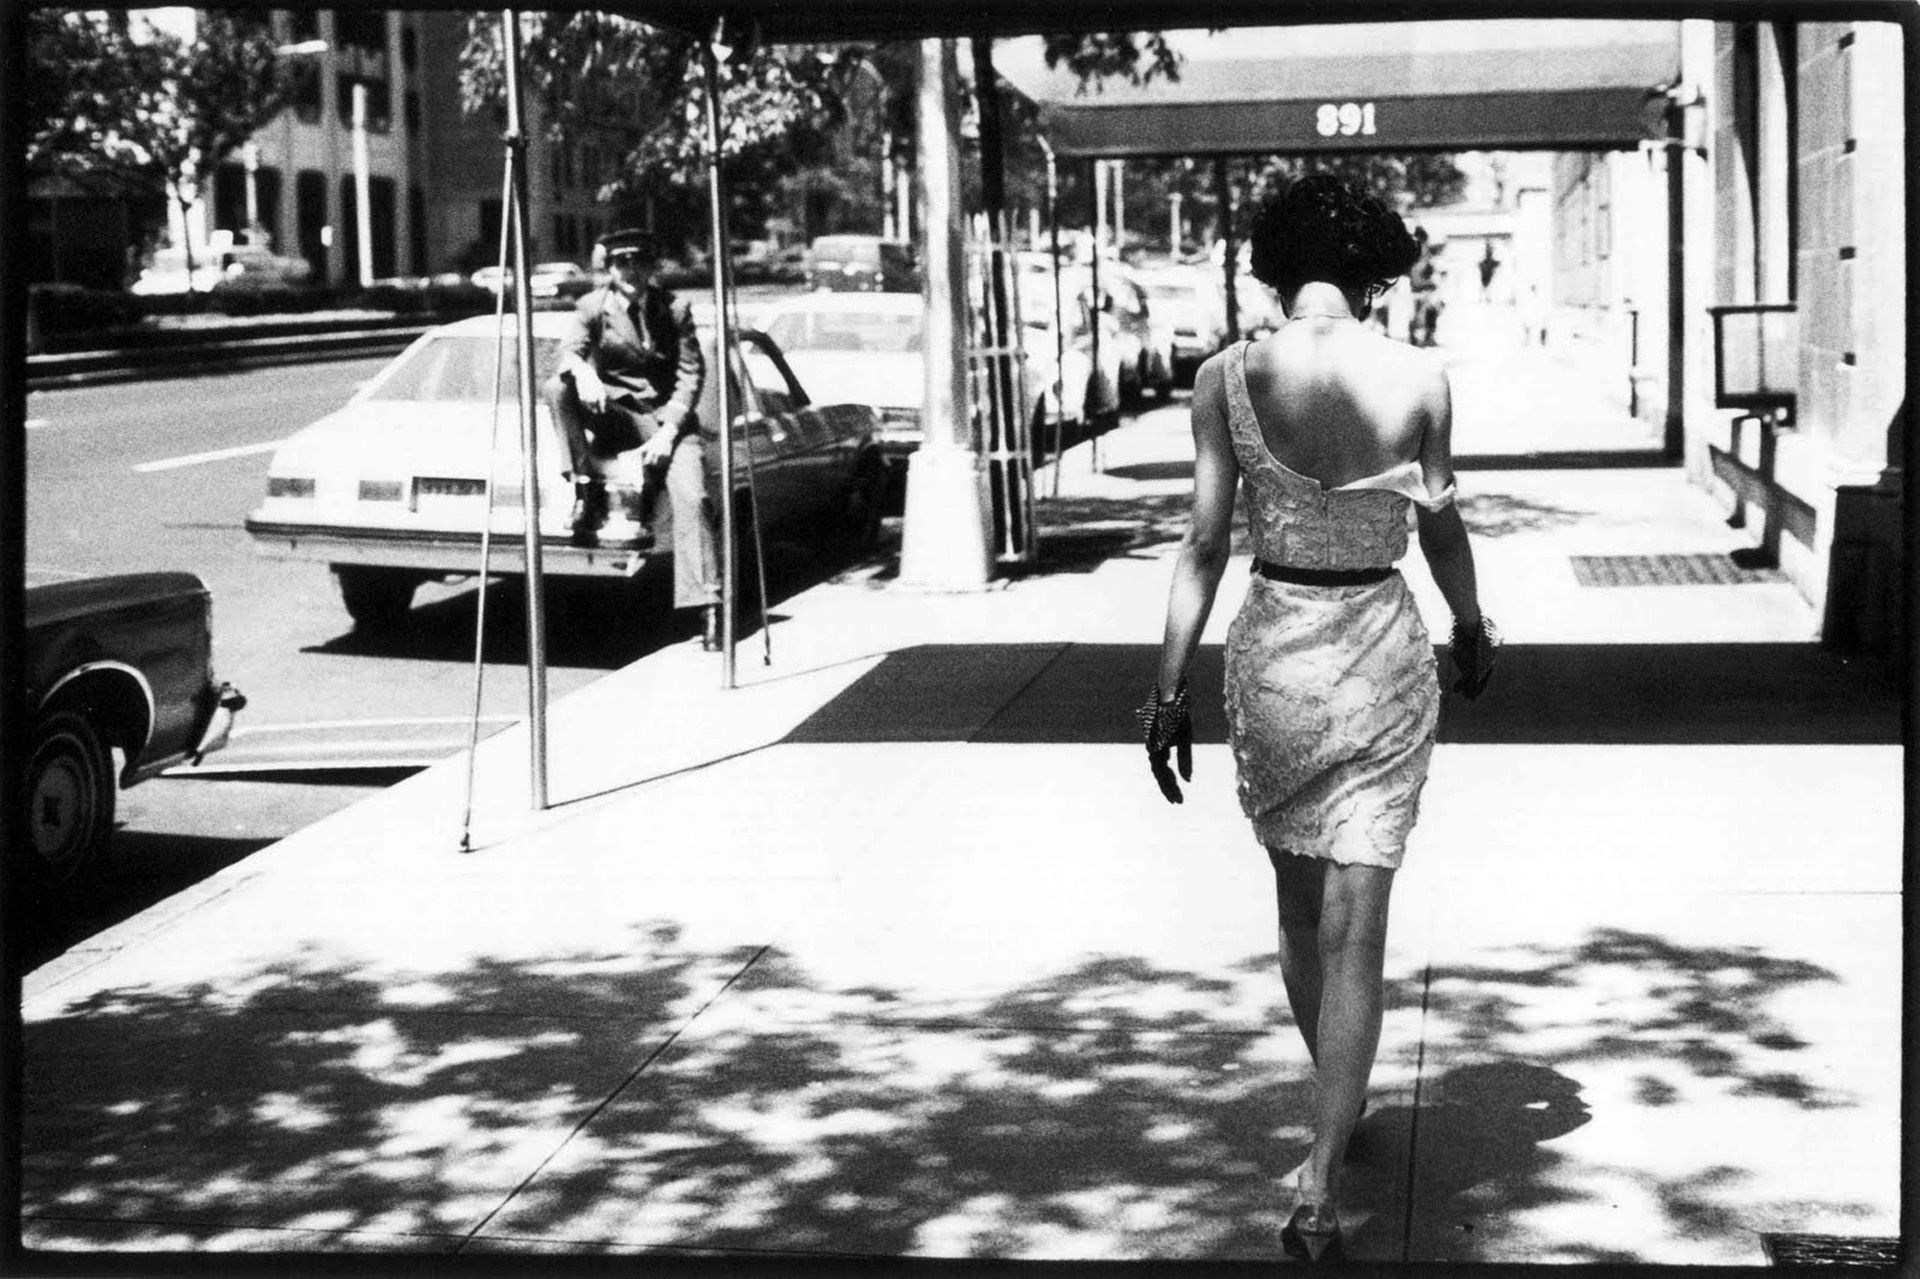 A woman walking down the street in front of a store window. - 60s